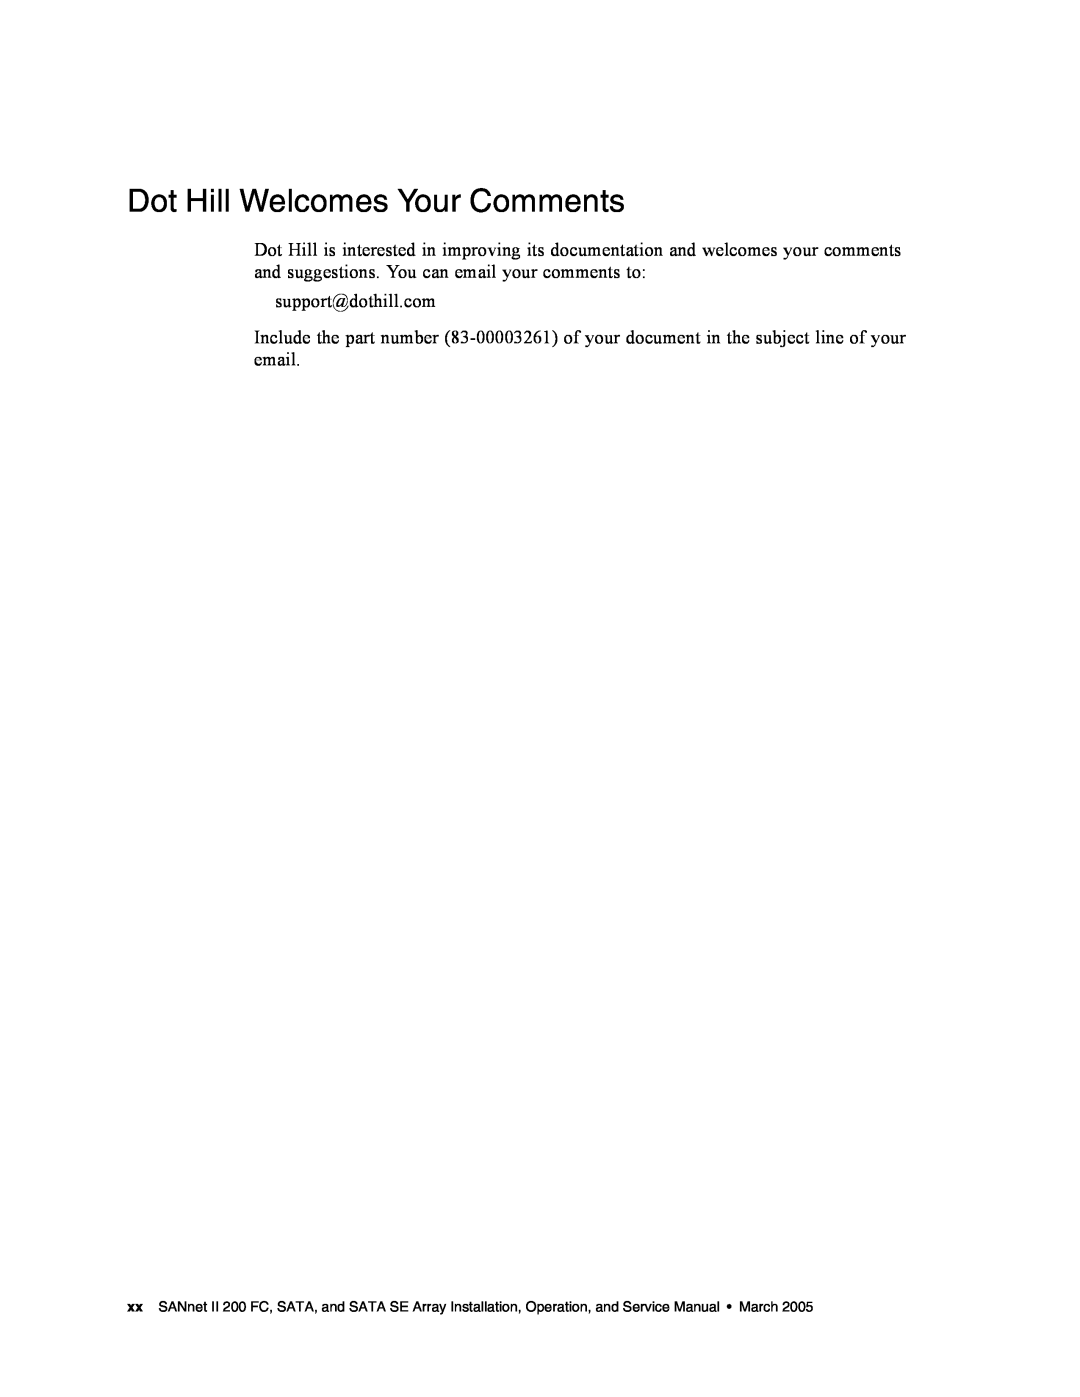 Dot Hill Systems II 200 FC service manual Dot Hill Welcomes Your Comments 